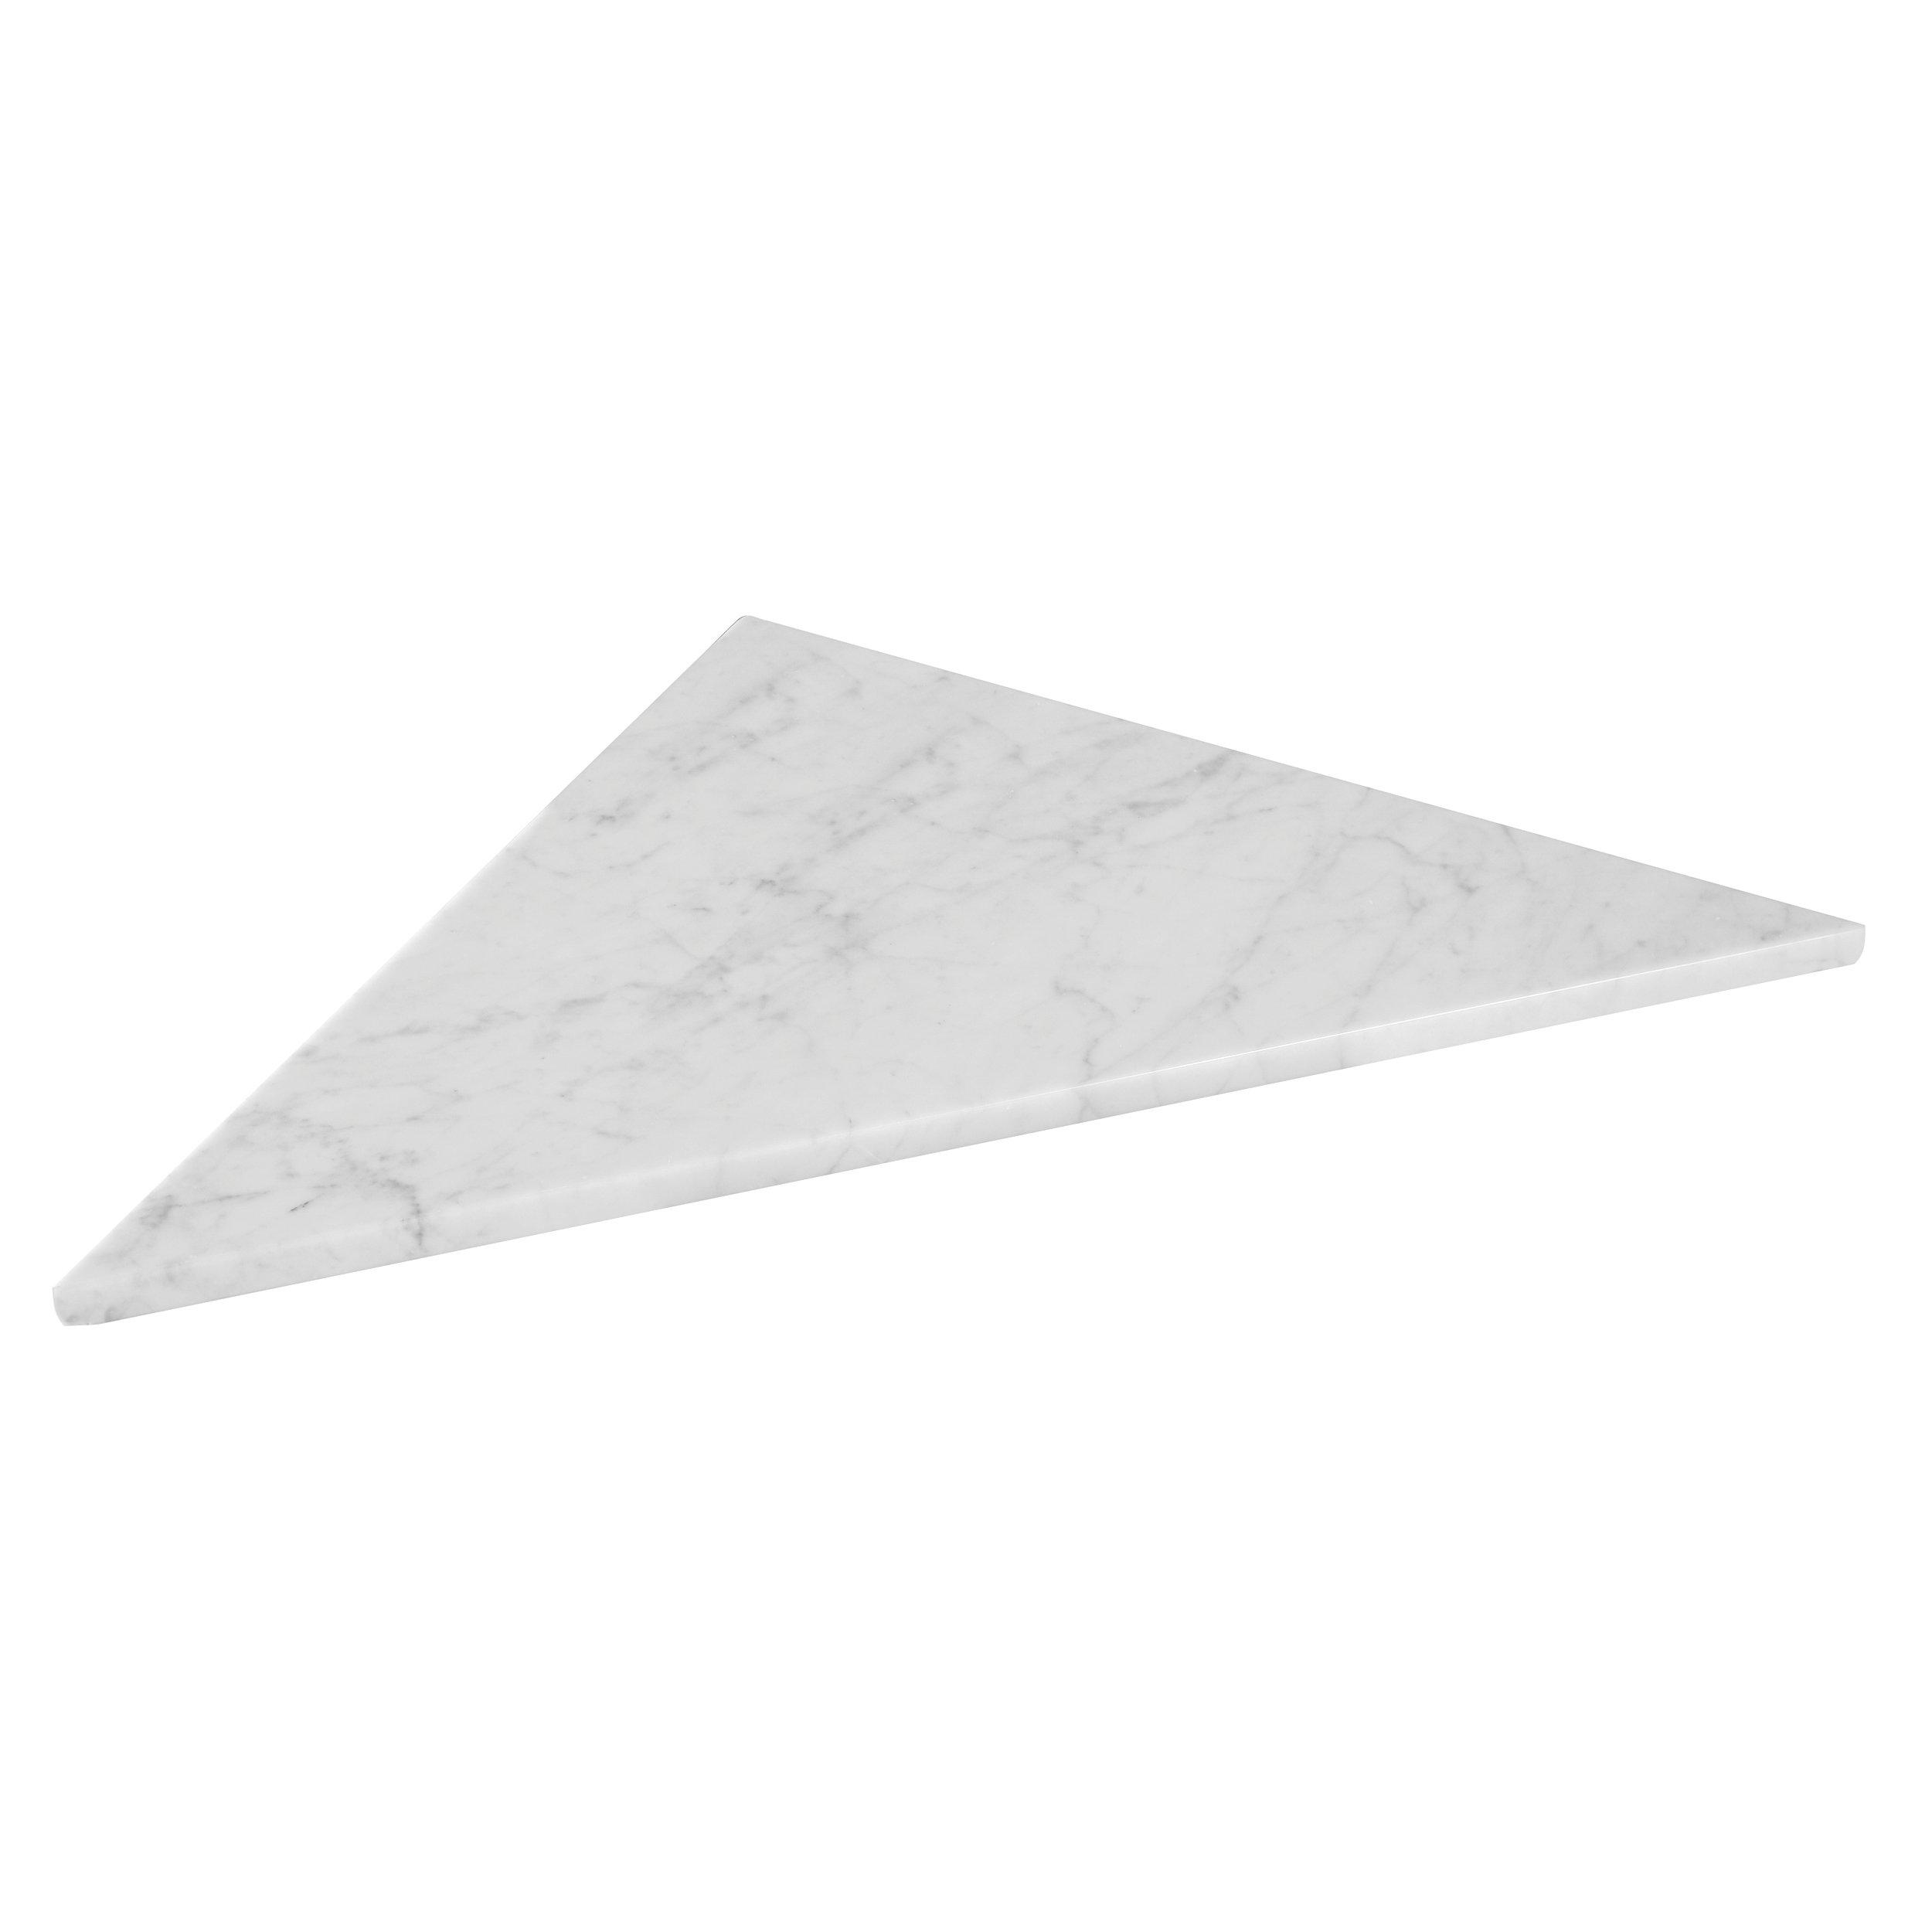 Carrara Marble 18 x 36 in. Triangle Shower Bench